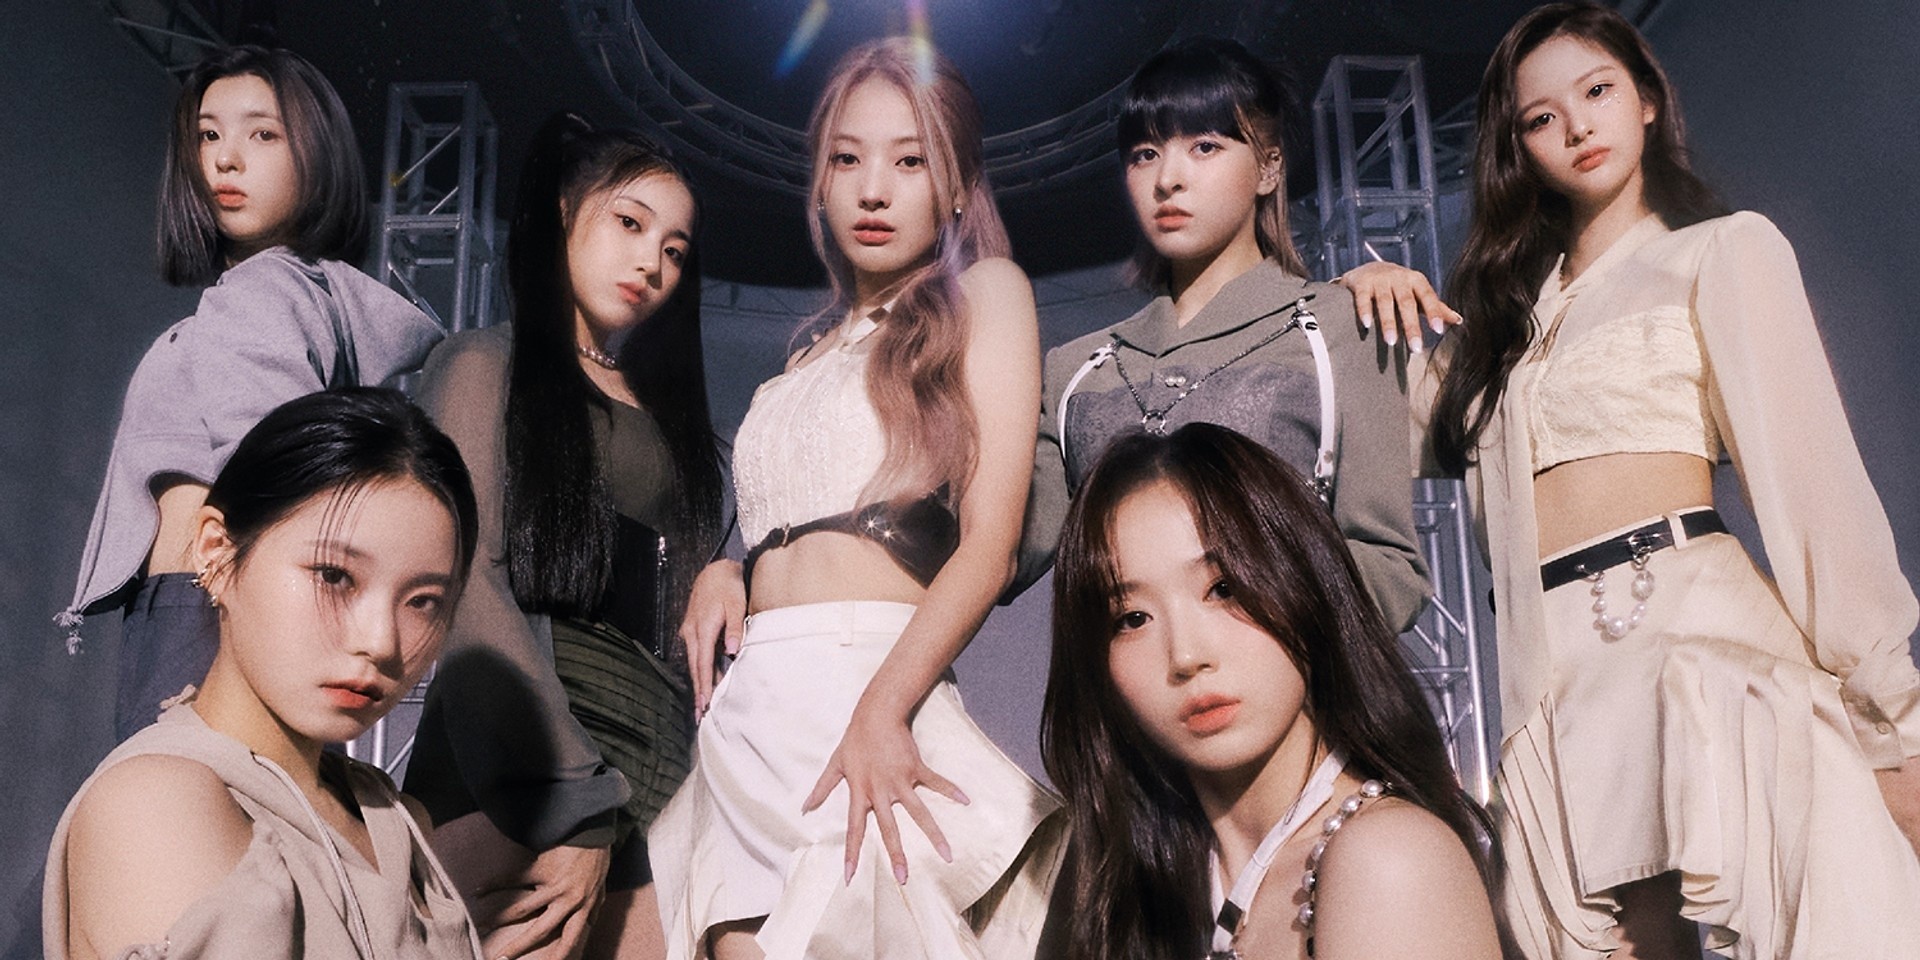 Here's everything you need to know about JYP's newest girl group, NMIXX